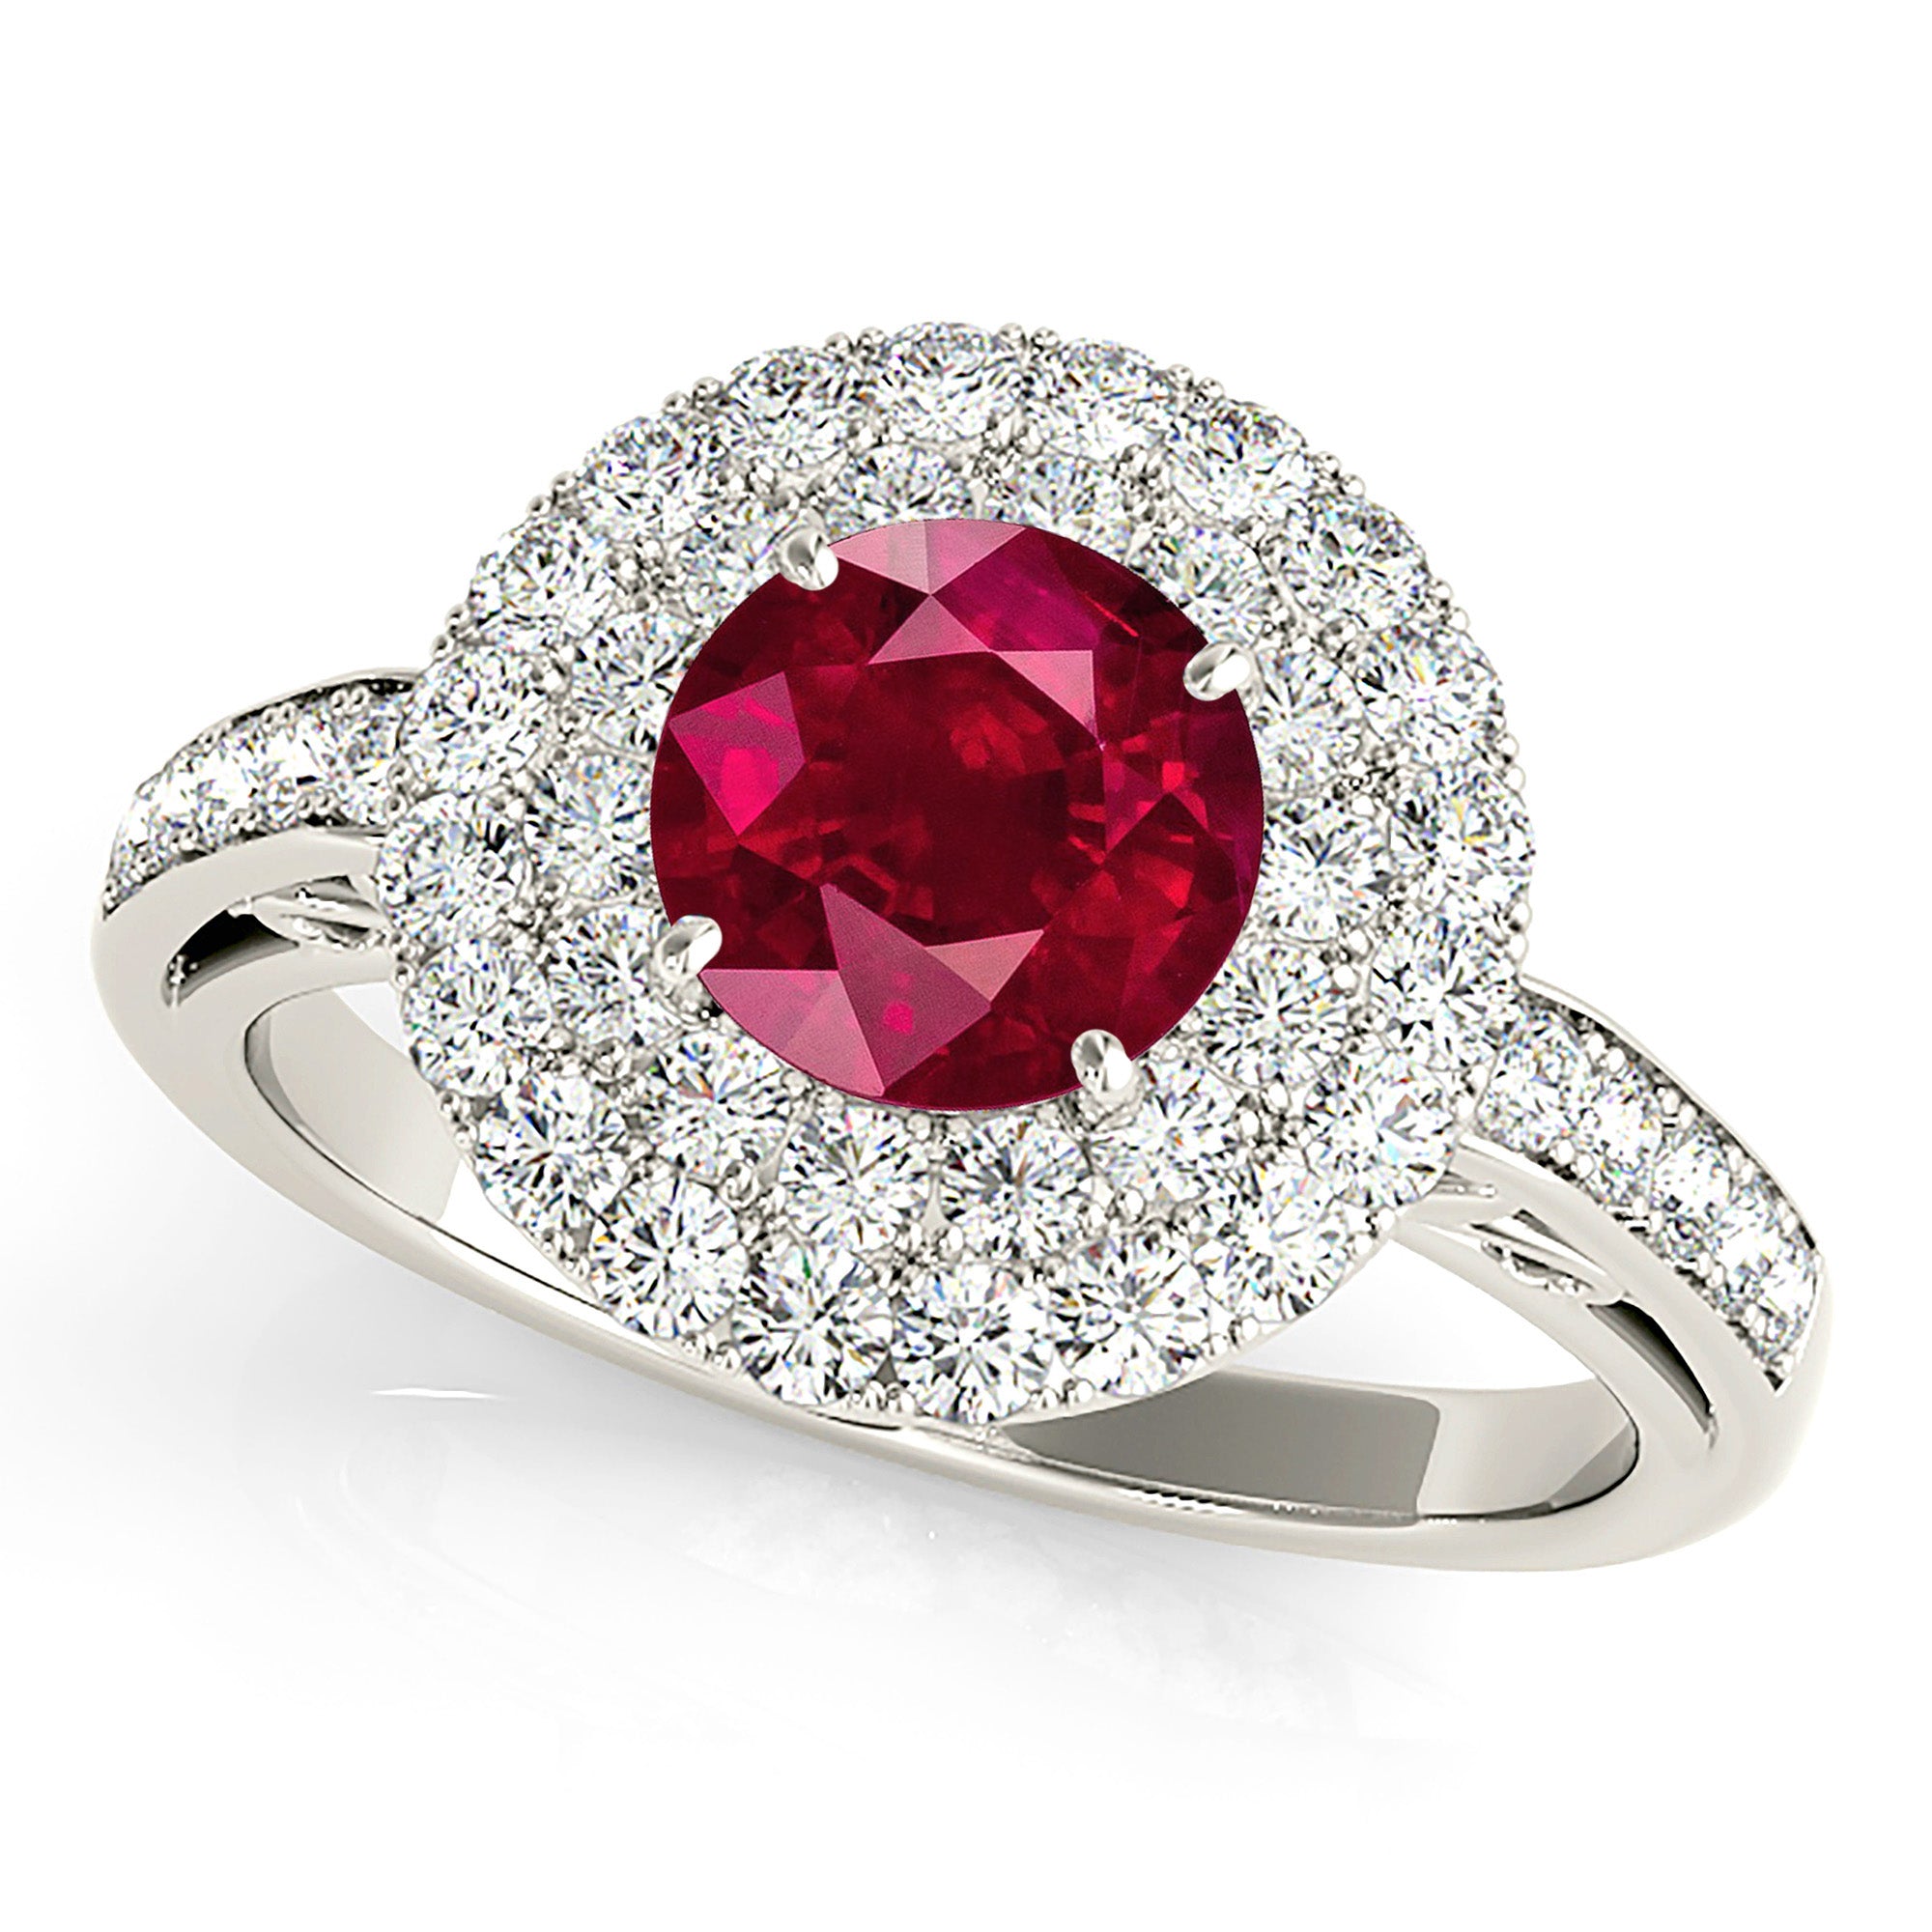 1.35 ct. Genuine Ruby Ring With 1.00 ctw. Diamond 3 D Halo and Hand Carved Diamond Band-in 14K/18K White, Yellow, Rose Gold and Platinum - Christmas Jewelry Gift -VIRABYANI